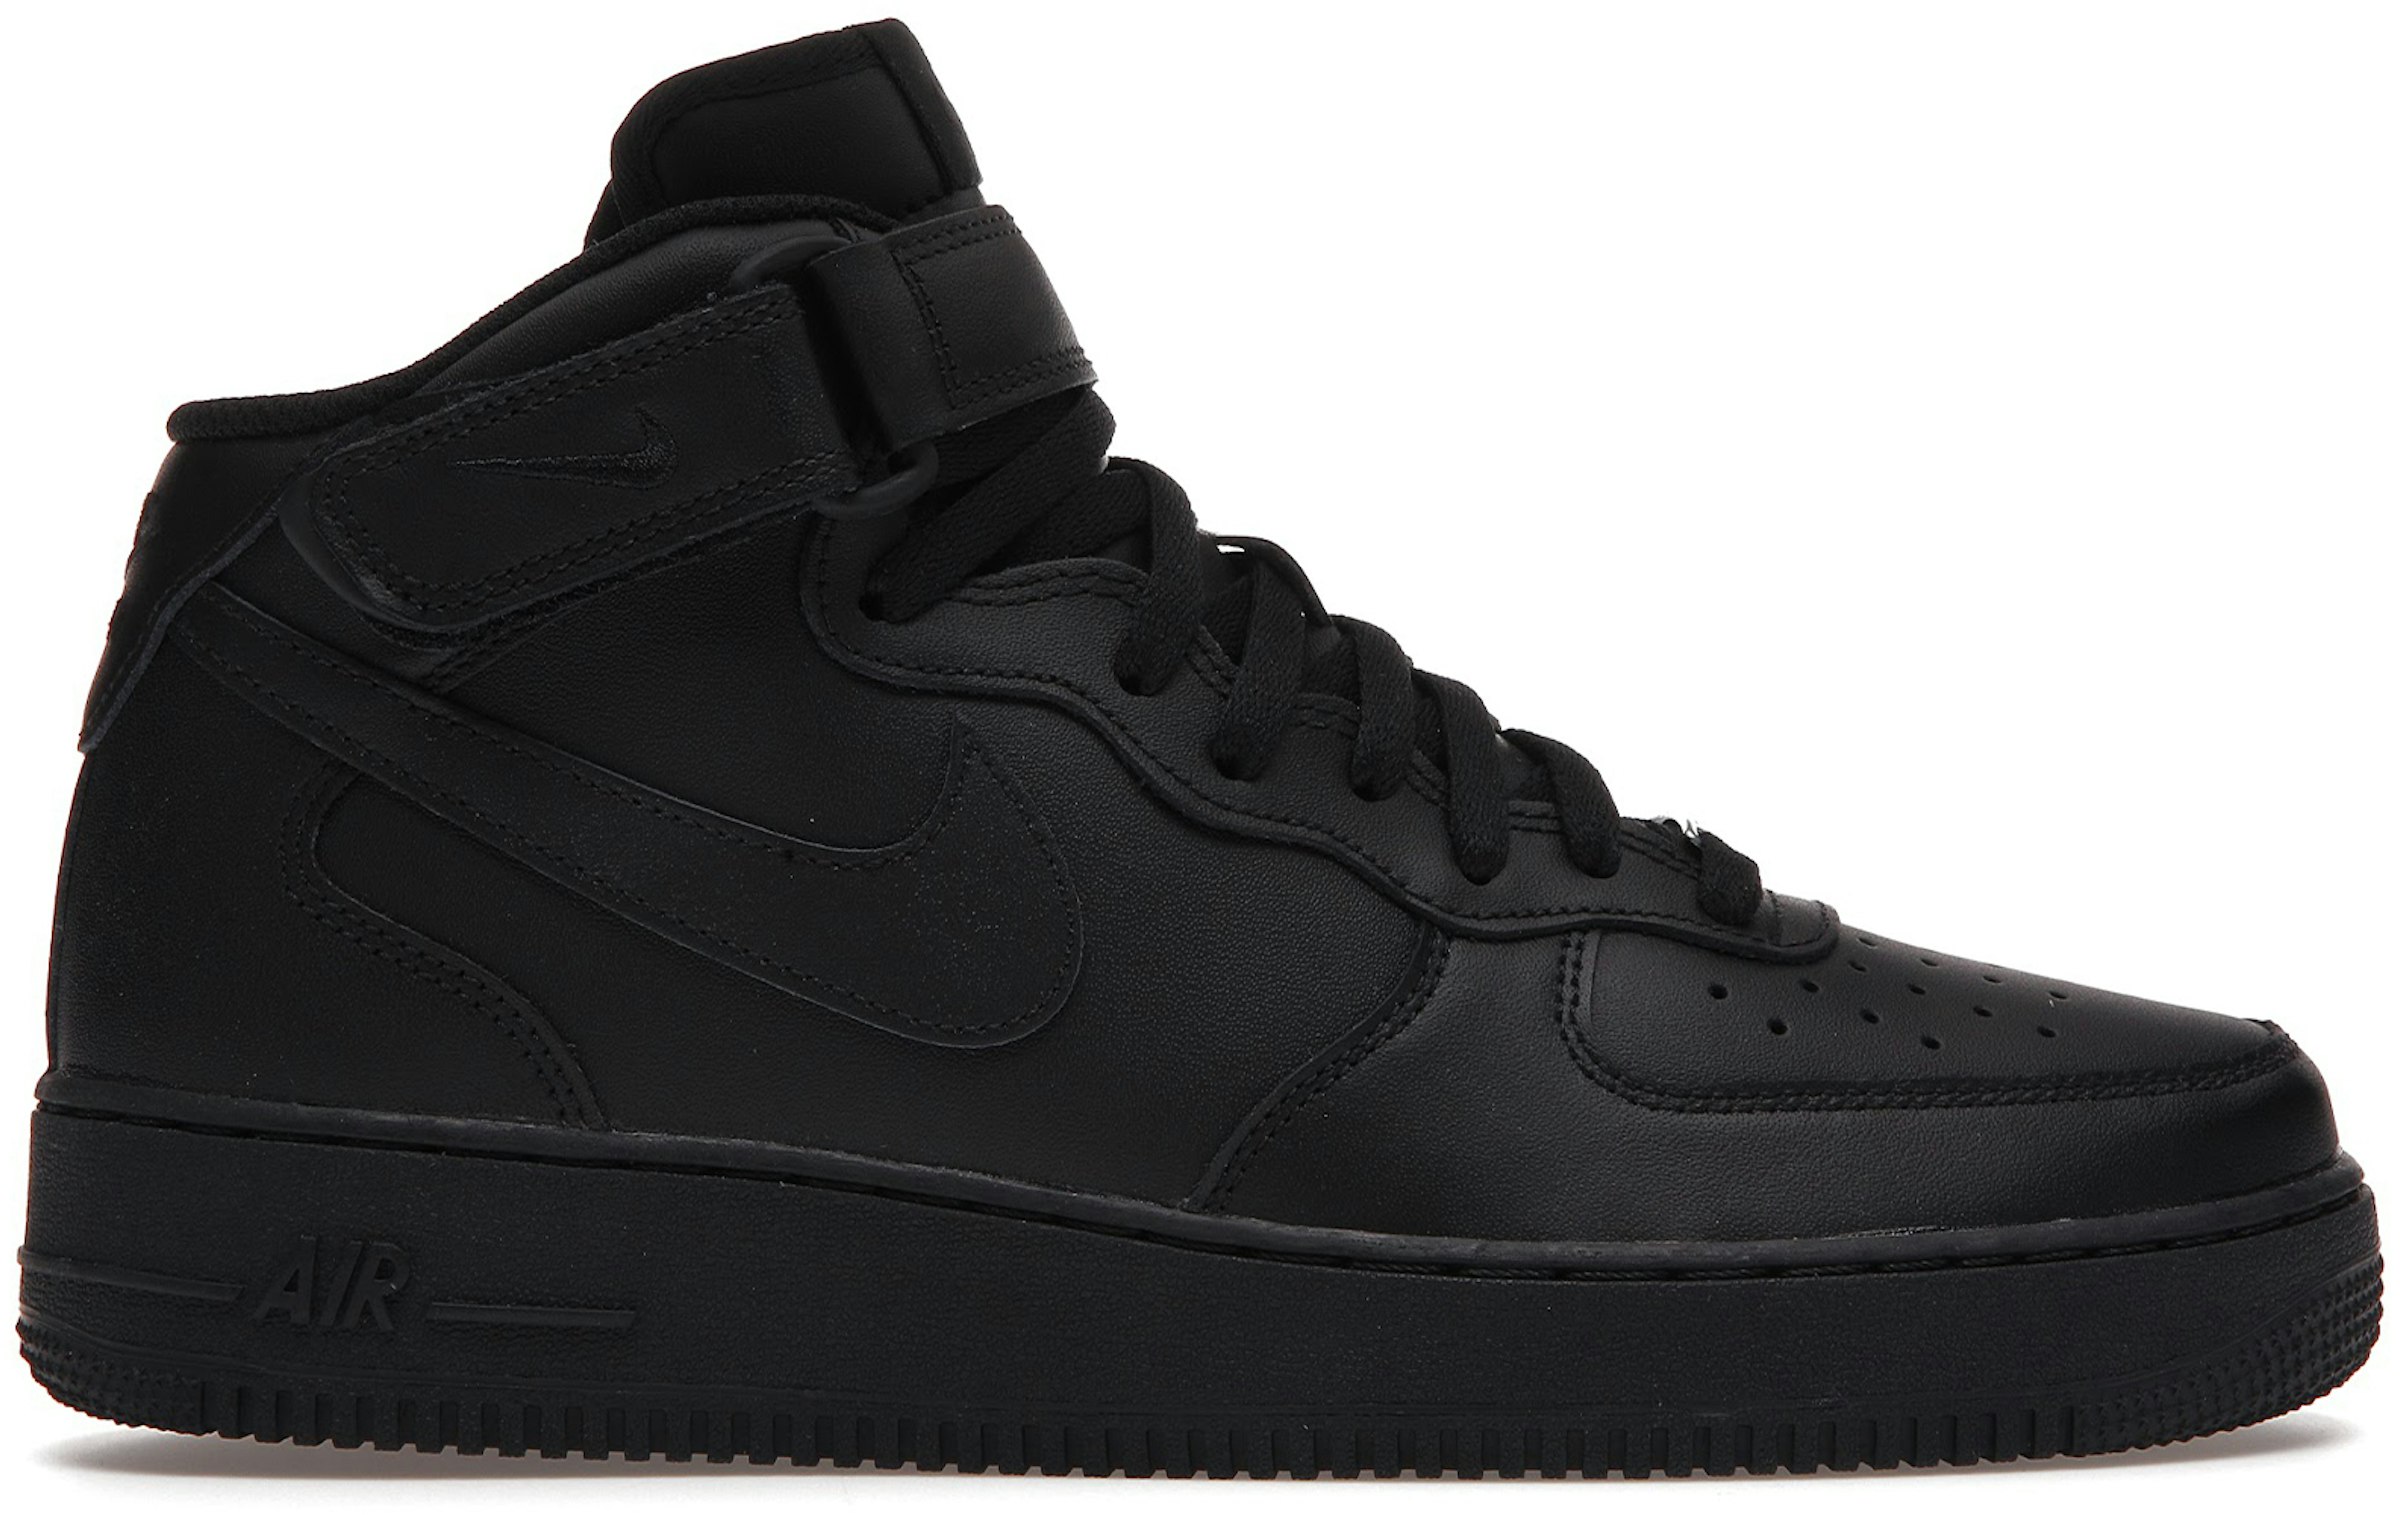 Componer Injusticia mantequilla Nike Air Force 1 Mid '07 Triple Black (2021) Men's - 315123-001/CW2289-001  - US